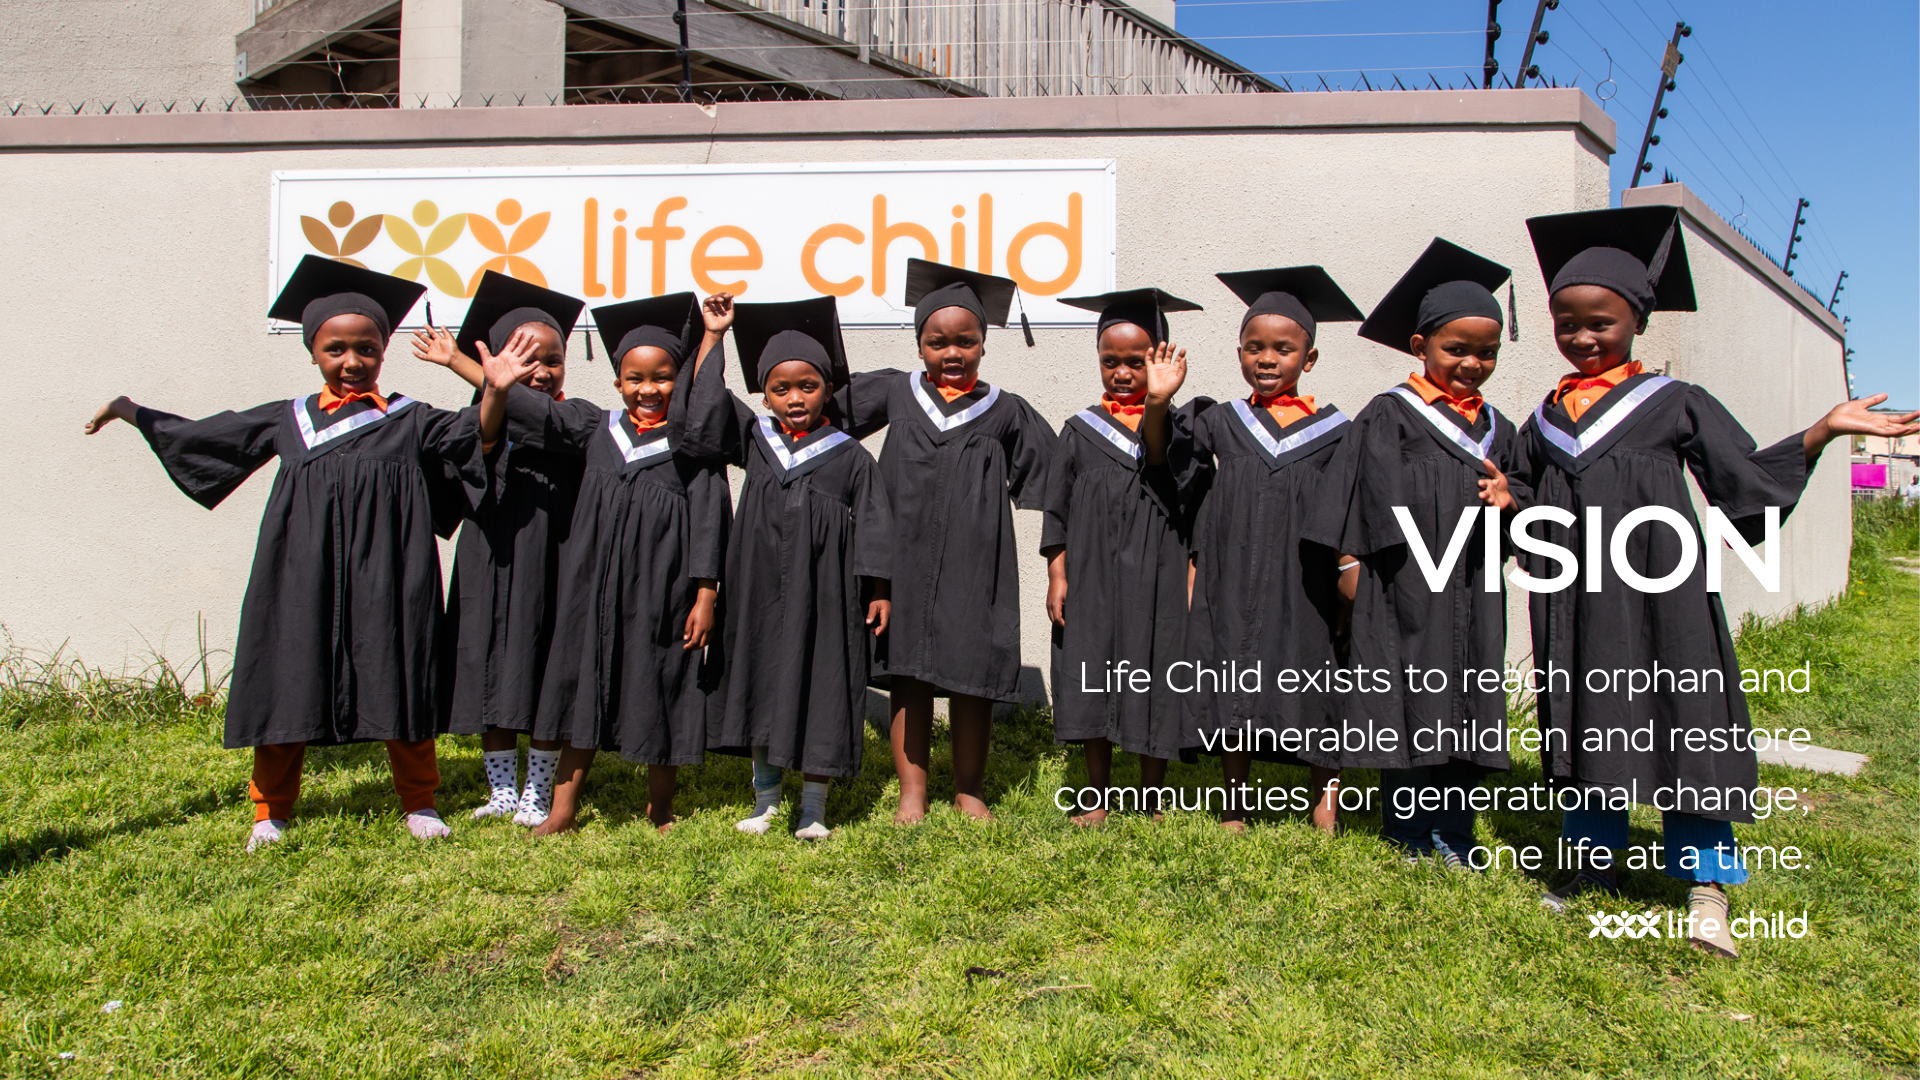 Life Child exists to reach orphan and vulnerable children and restore communities for generational change; one life at a time